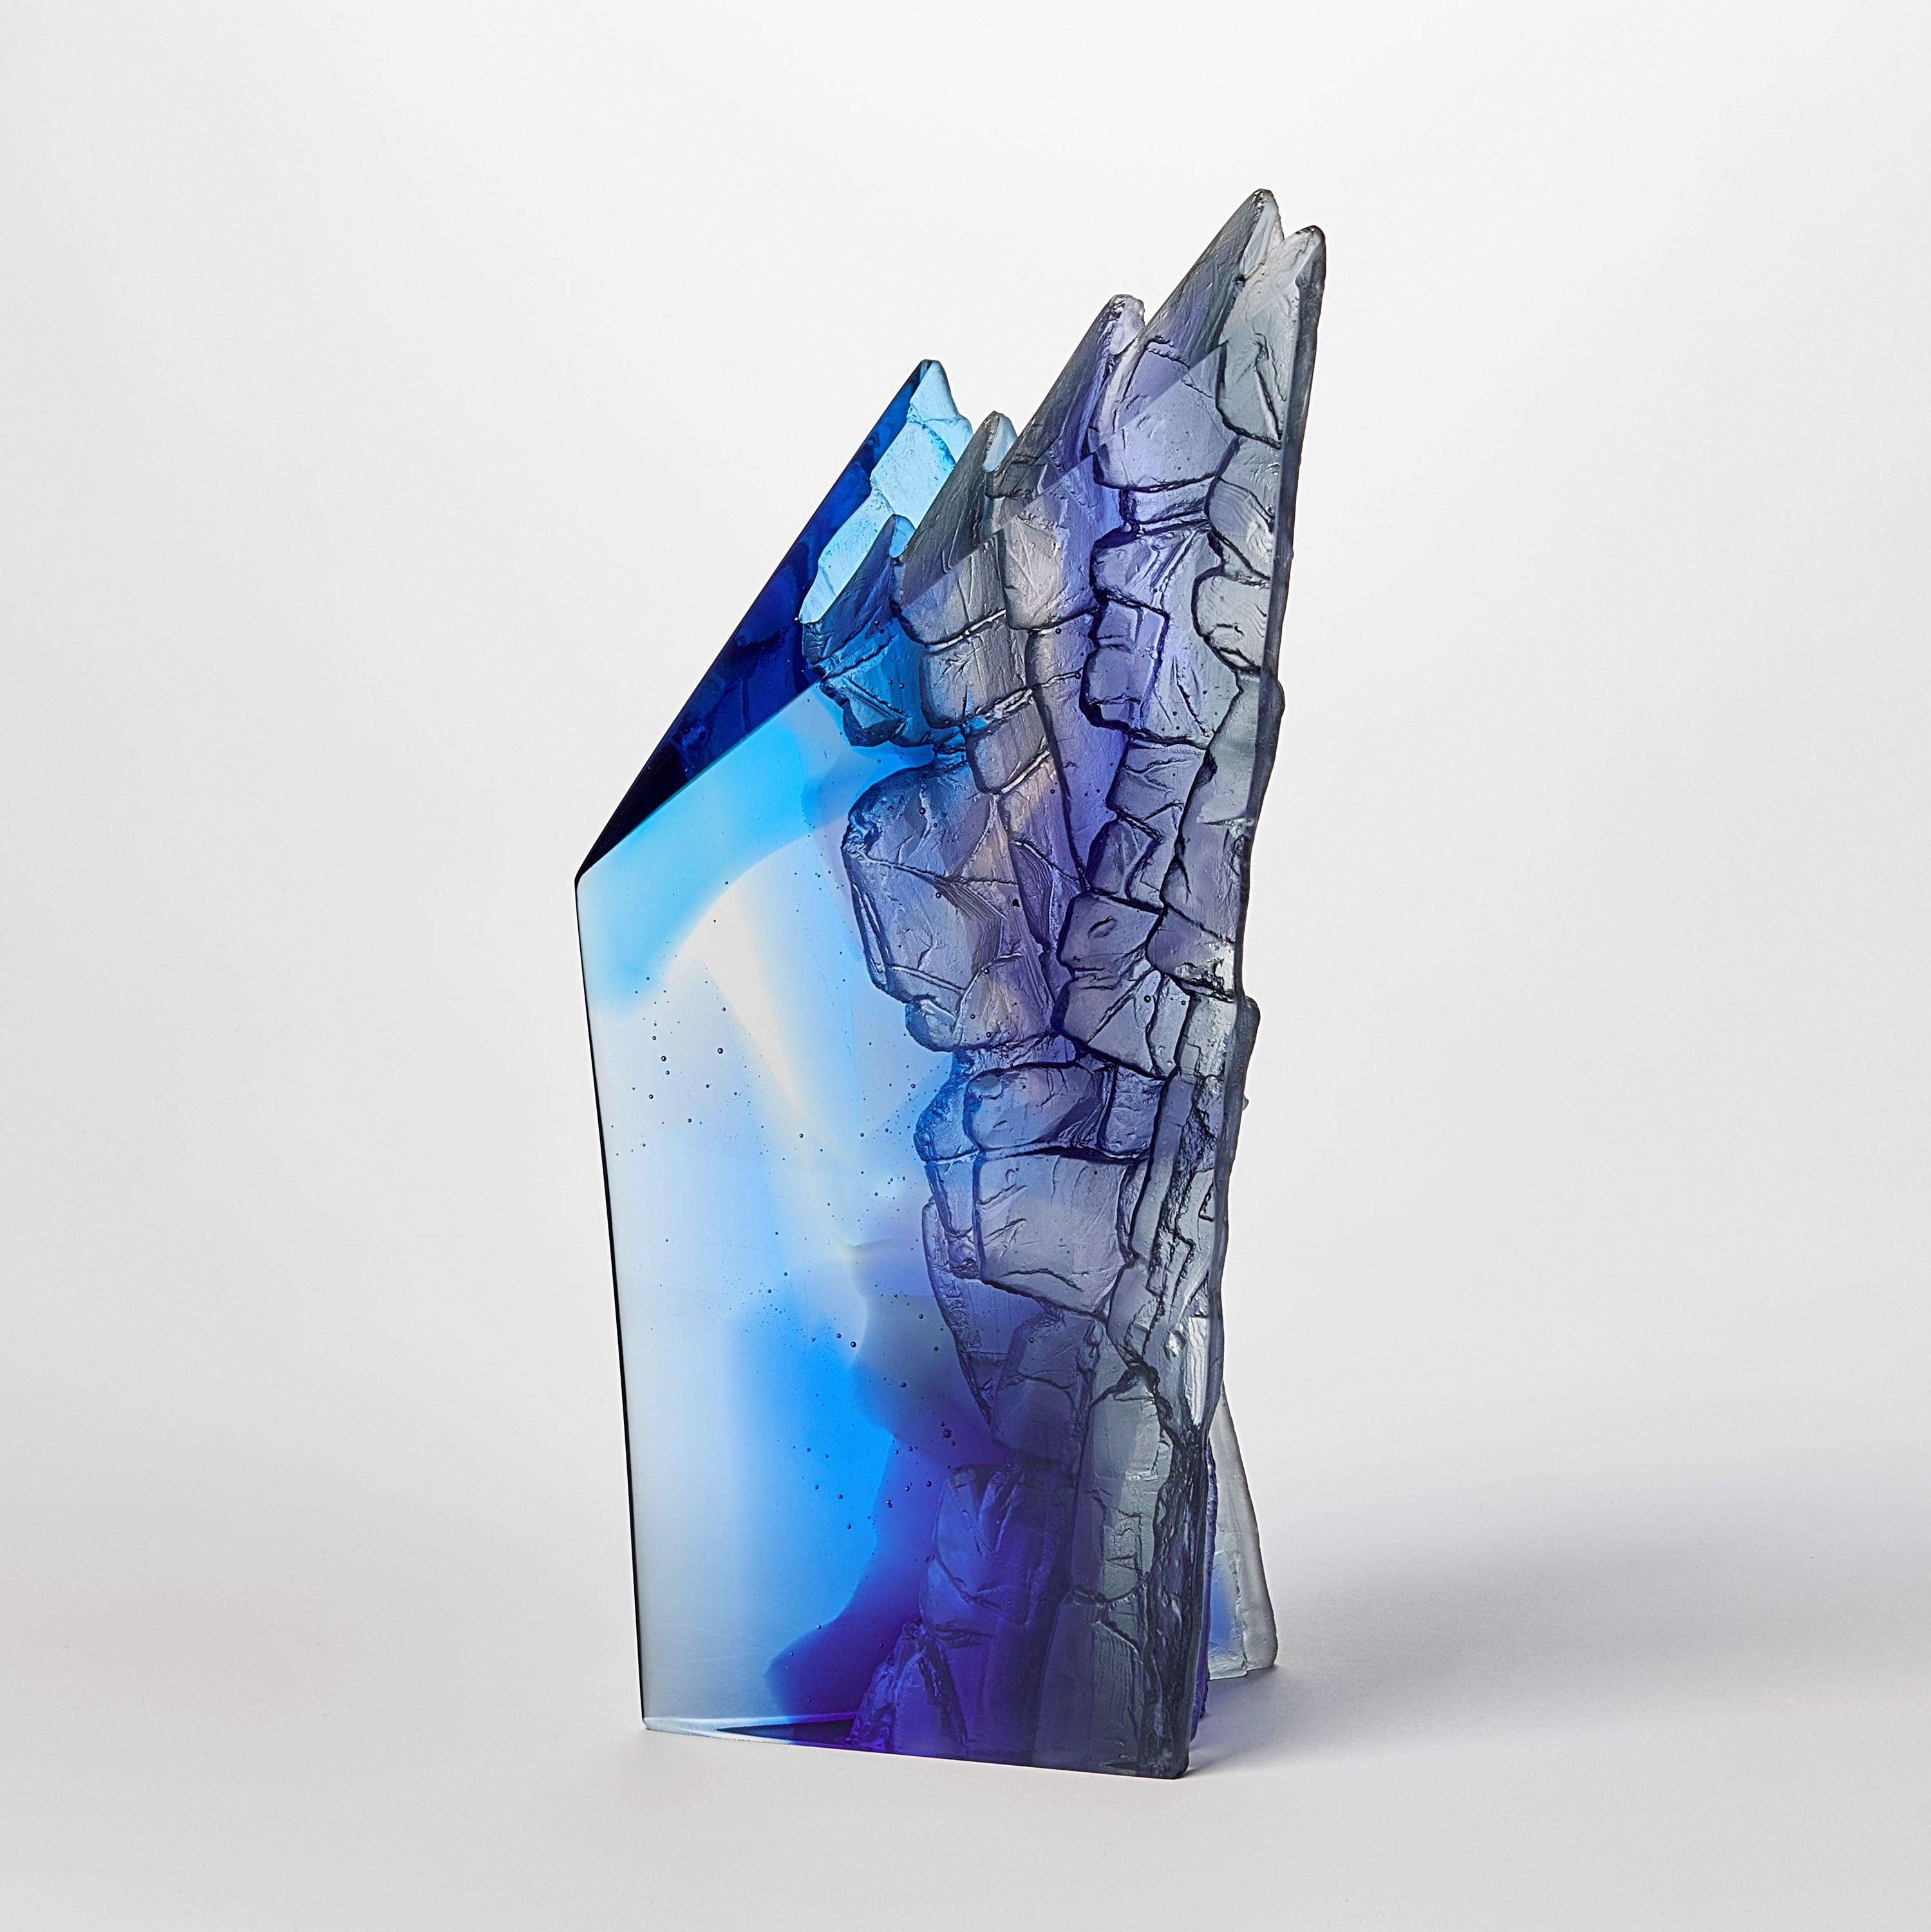 'Deep Blue Cliff II' is a unique cast glass sculpture by the British artist, Crispian Heath.

Crispian Heath's work is predominantly inspired by landscape and his love for exploring the rugged cliffs and other geological sites which are unique to